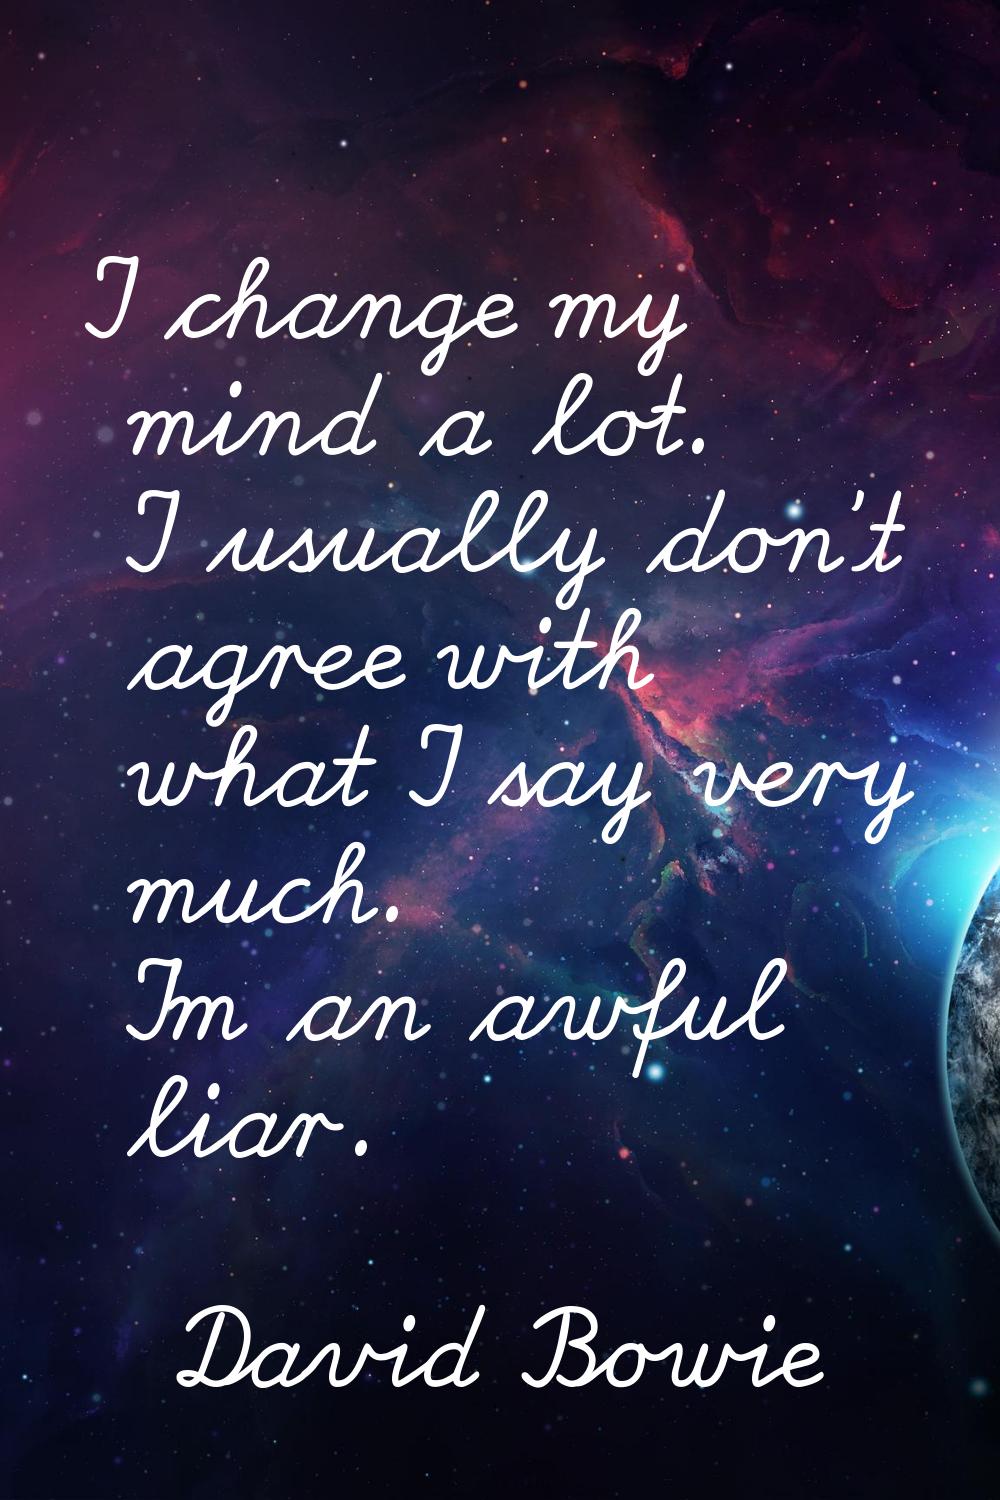 I change my mind a lot. I usually don't agree with what I say very much. I'm an awful liar.